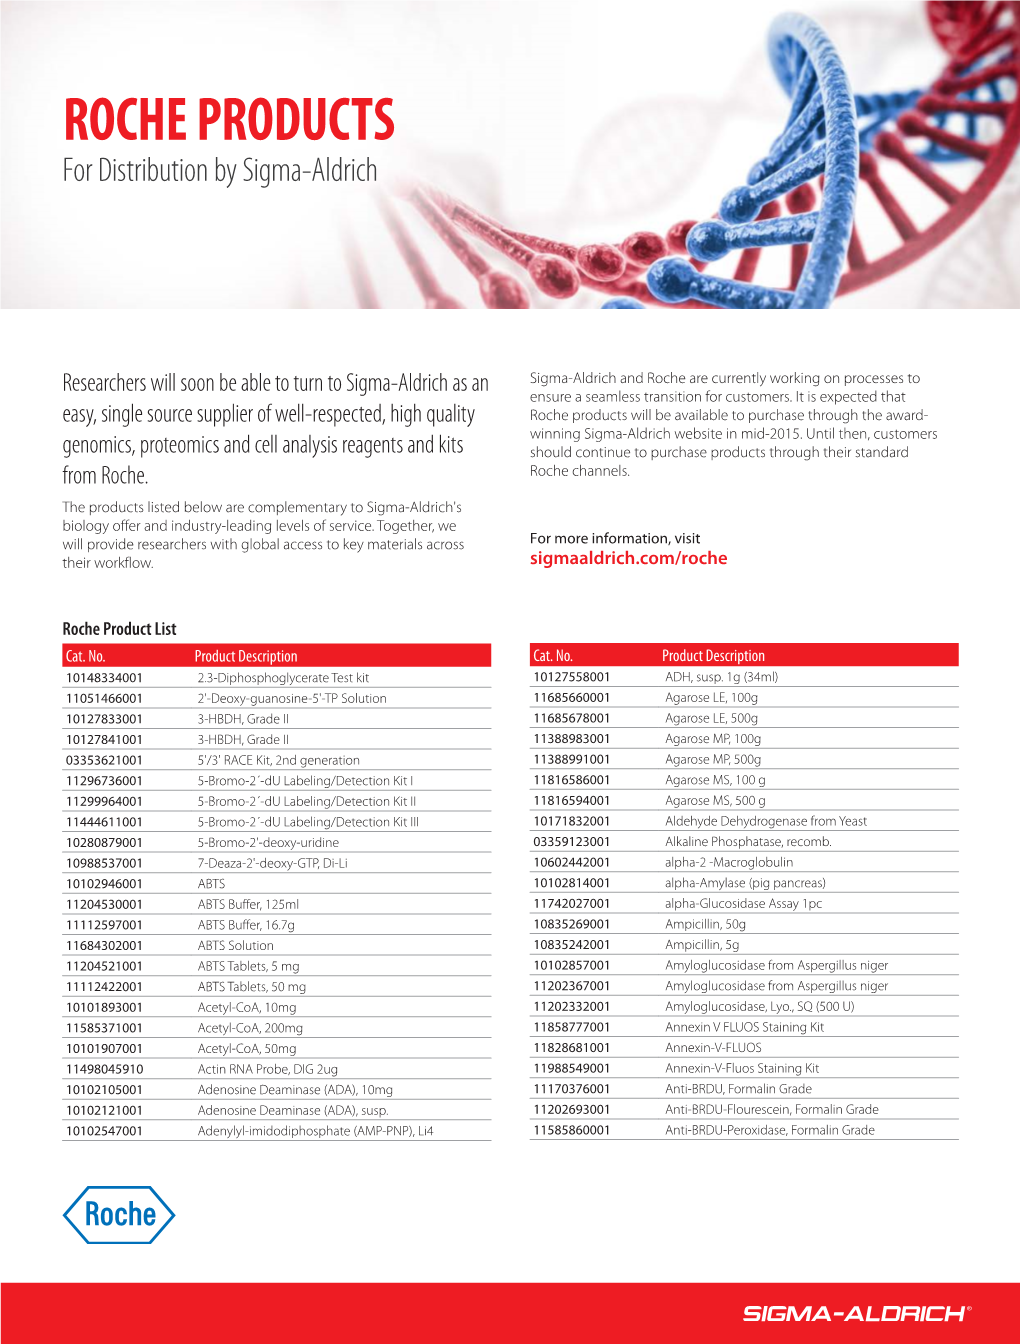 ROCHE PRODUCTS for Distribution by Sigma-Aldrich